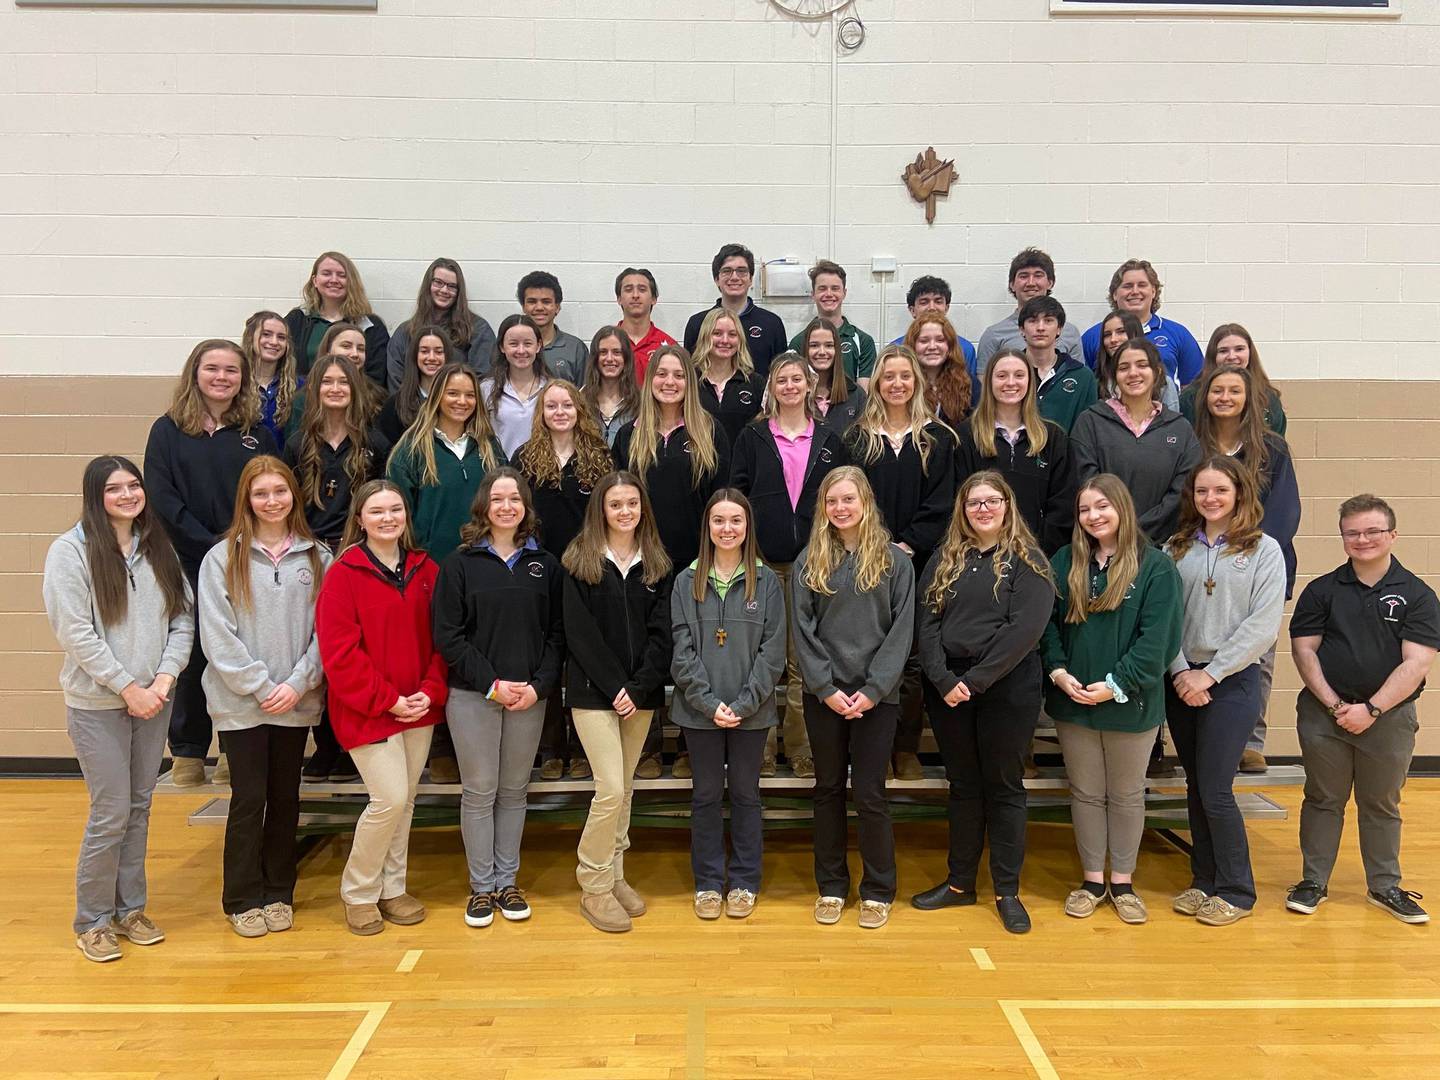 Providence Catholic High School in New Lenox inducted 64 students and six student directors into the school’s Augustinian Youth Ministry organization on Tuesday, April 5, 2022, at the school. Pictured are the junor and senior members.